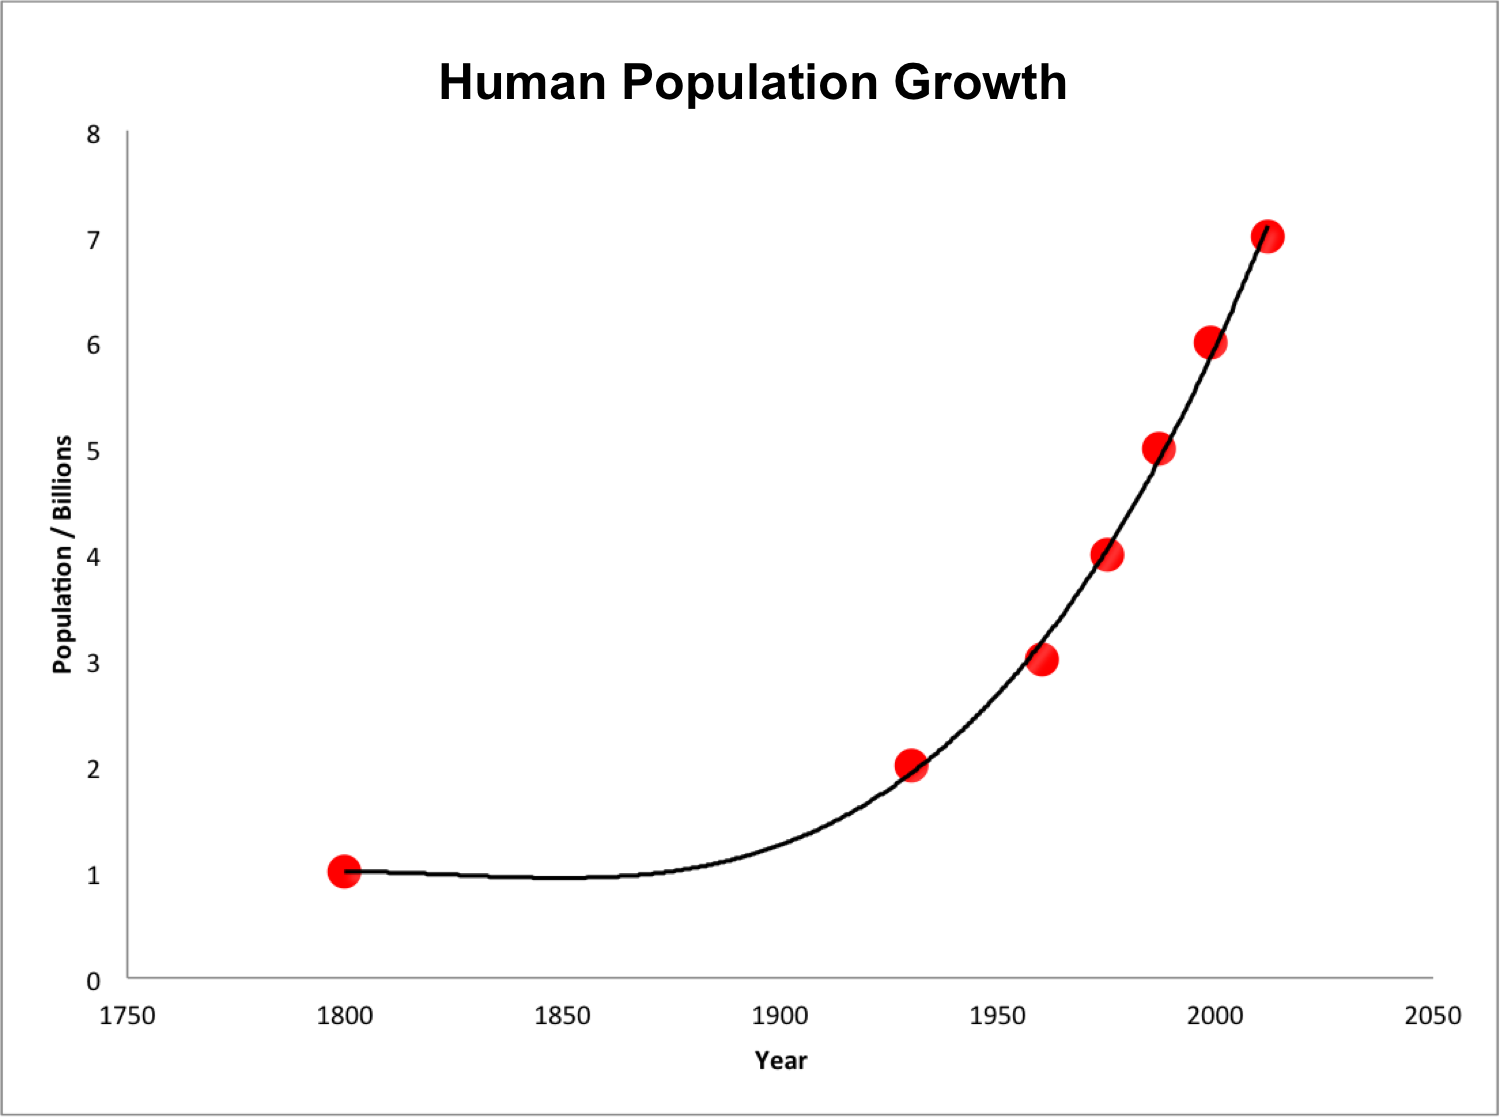 Human_population_growth_from_1800_to_2000.png